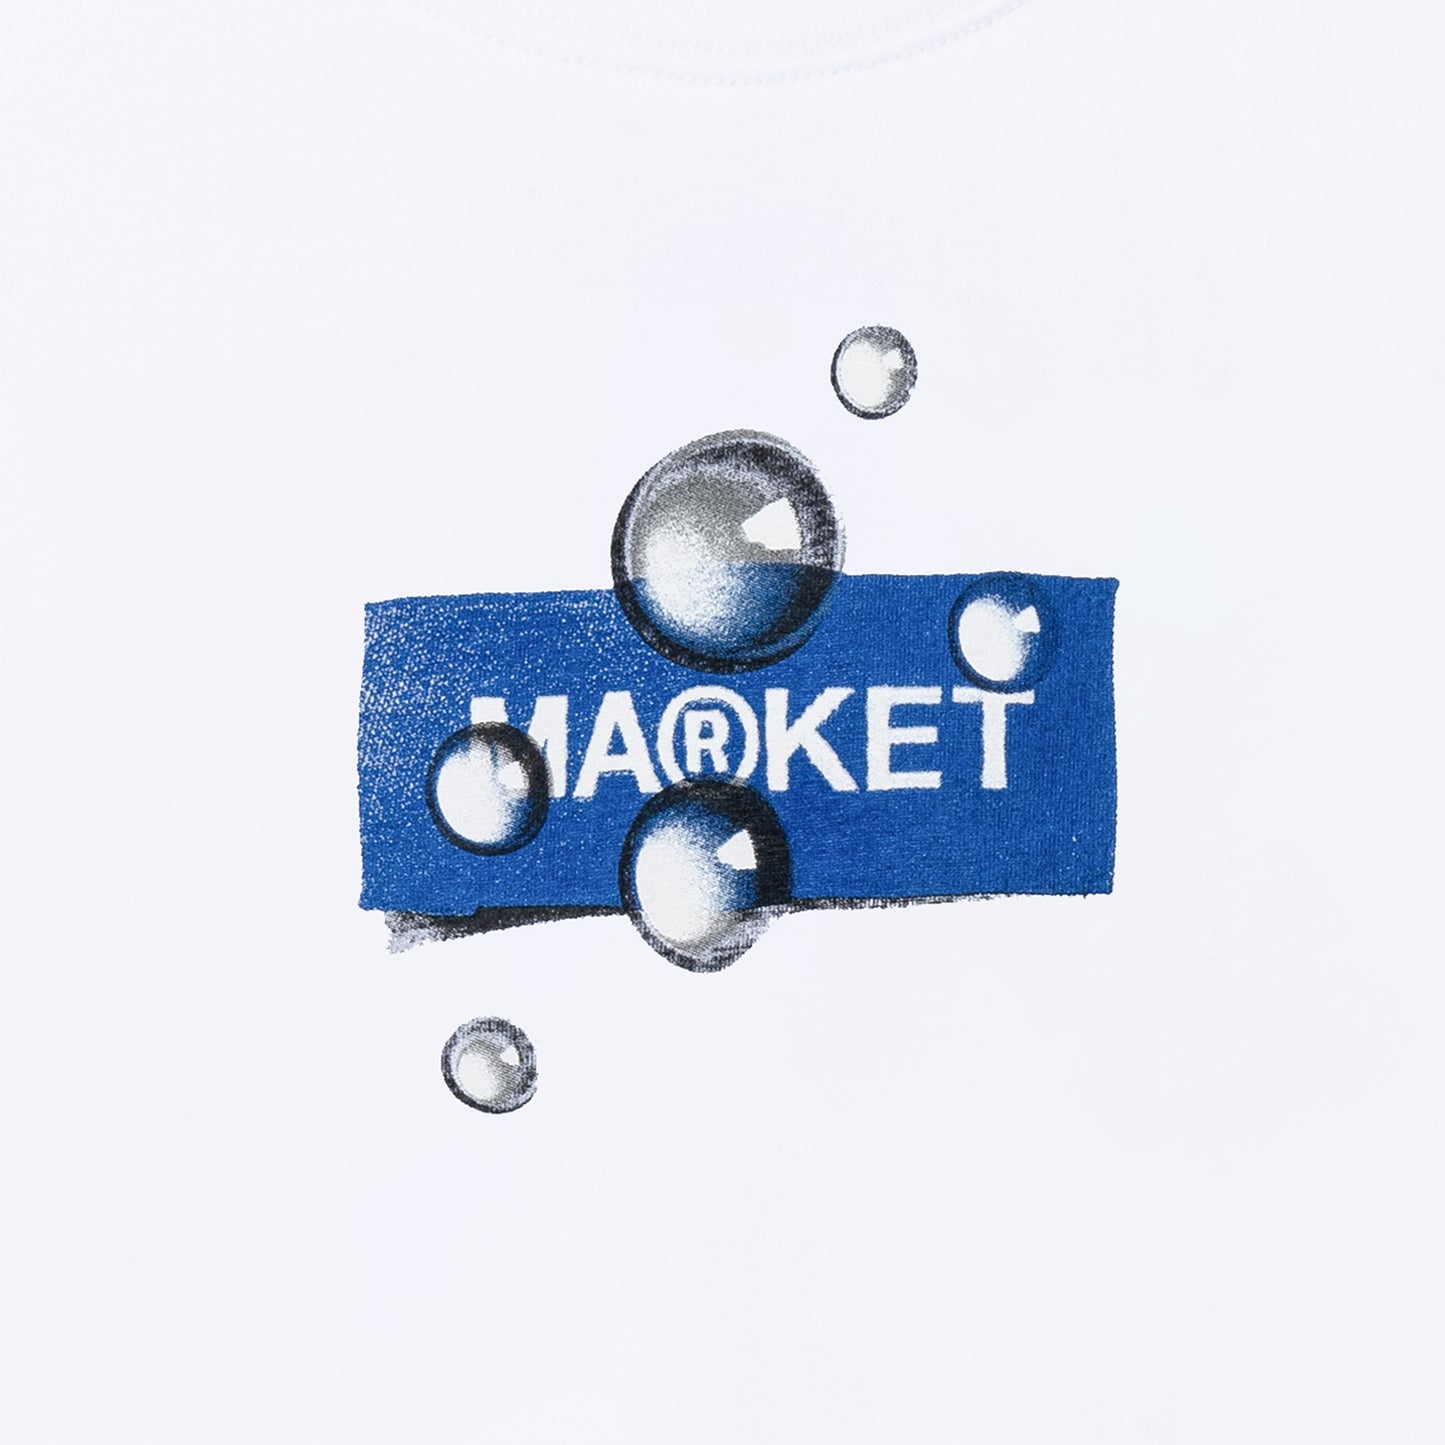 MARKET clothing brand DAMASK T-SHIRT. Find more graphic tees, hats, hoodies and more at MarketStudios.com. Formally Chinatown Market.